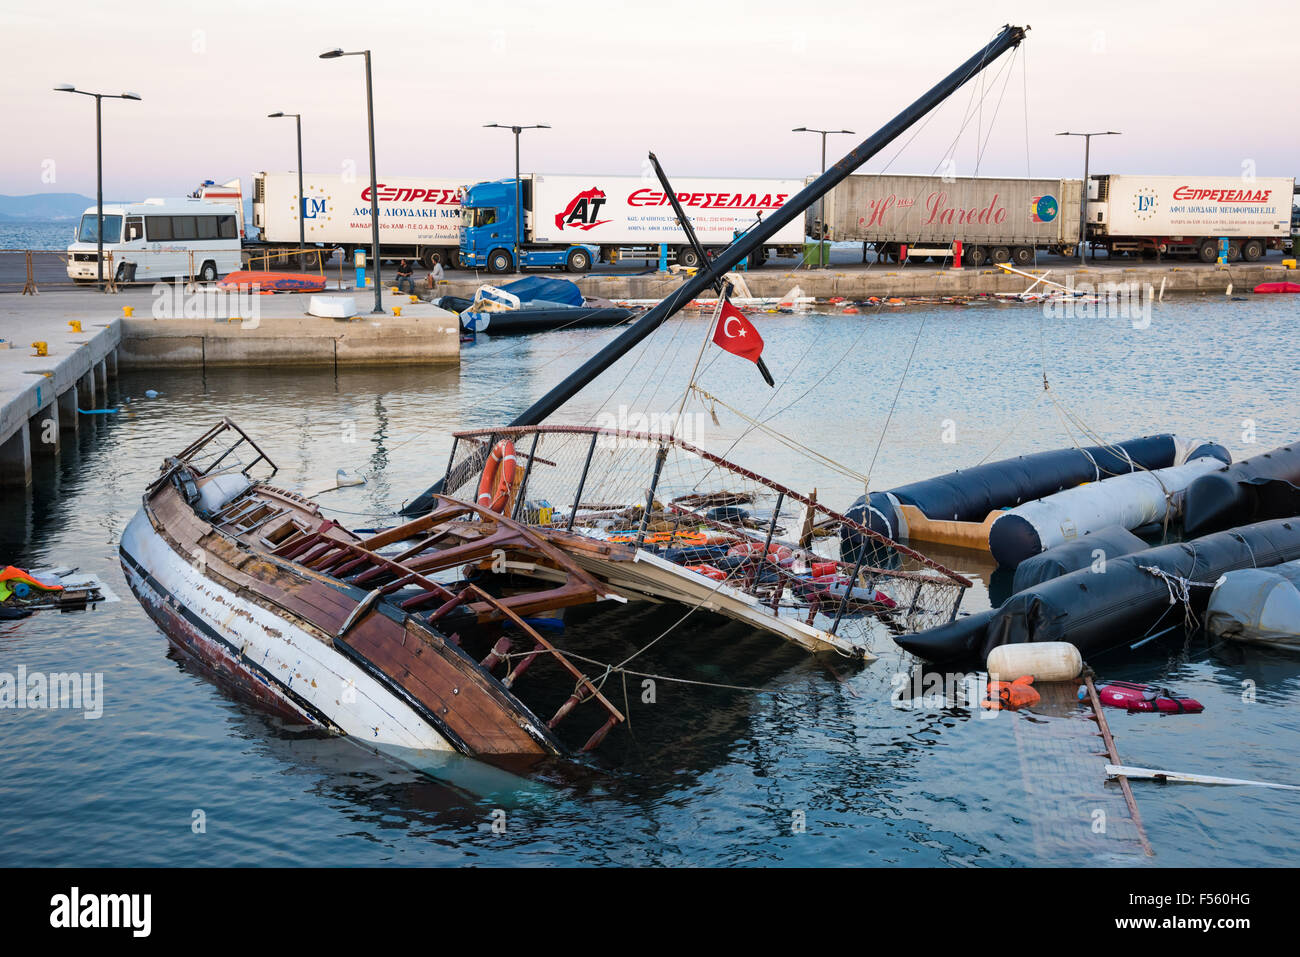 Half sunken ship and damaged boats on October 14, 2015 in the harbor of Kos island, Greece. Stock Photo